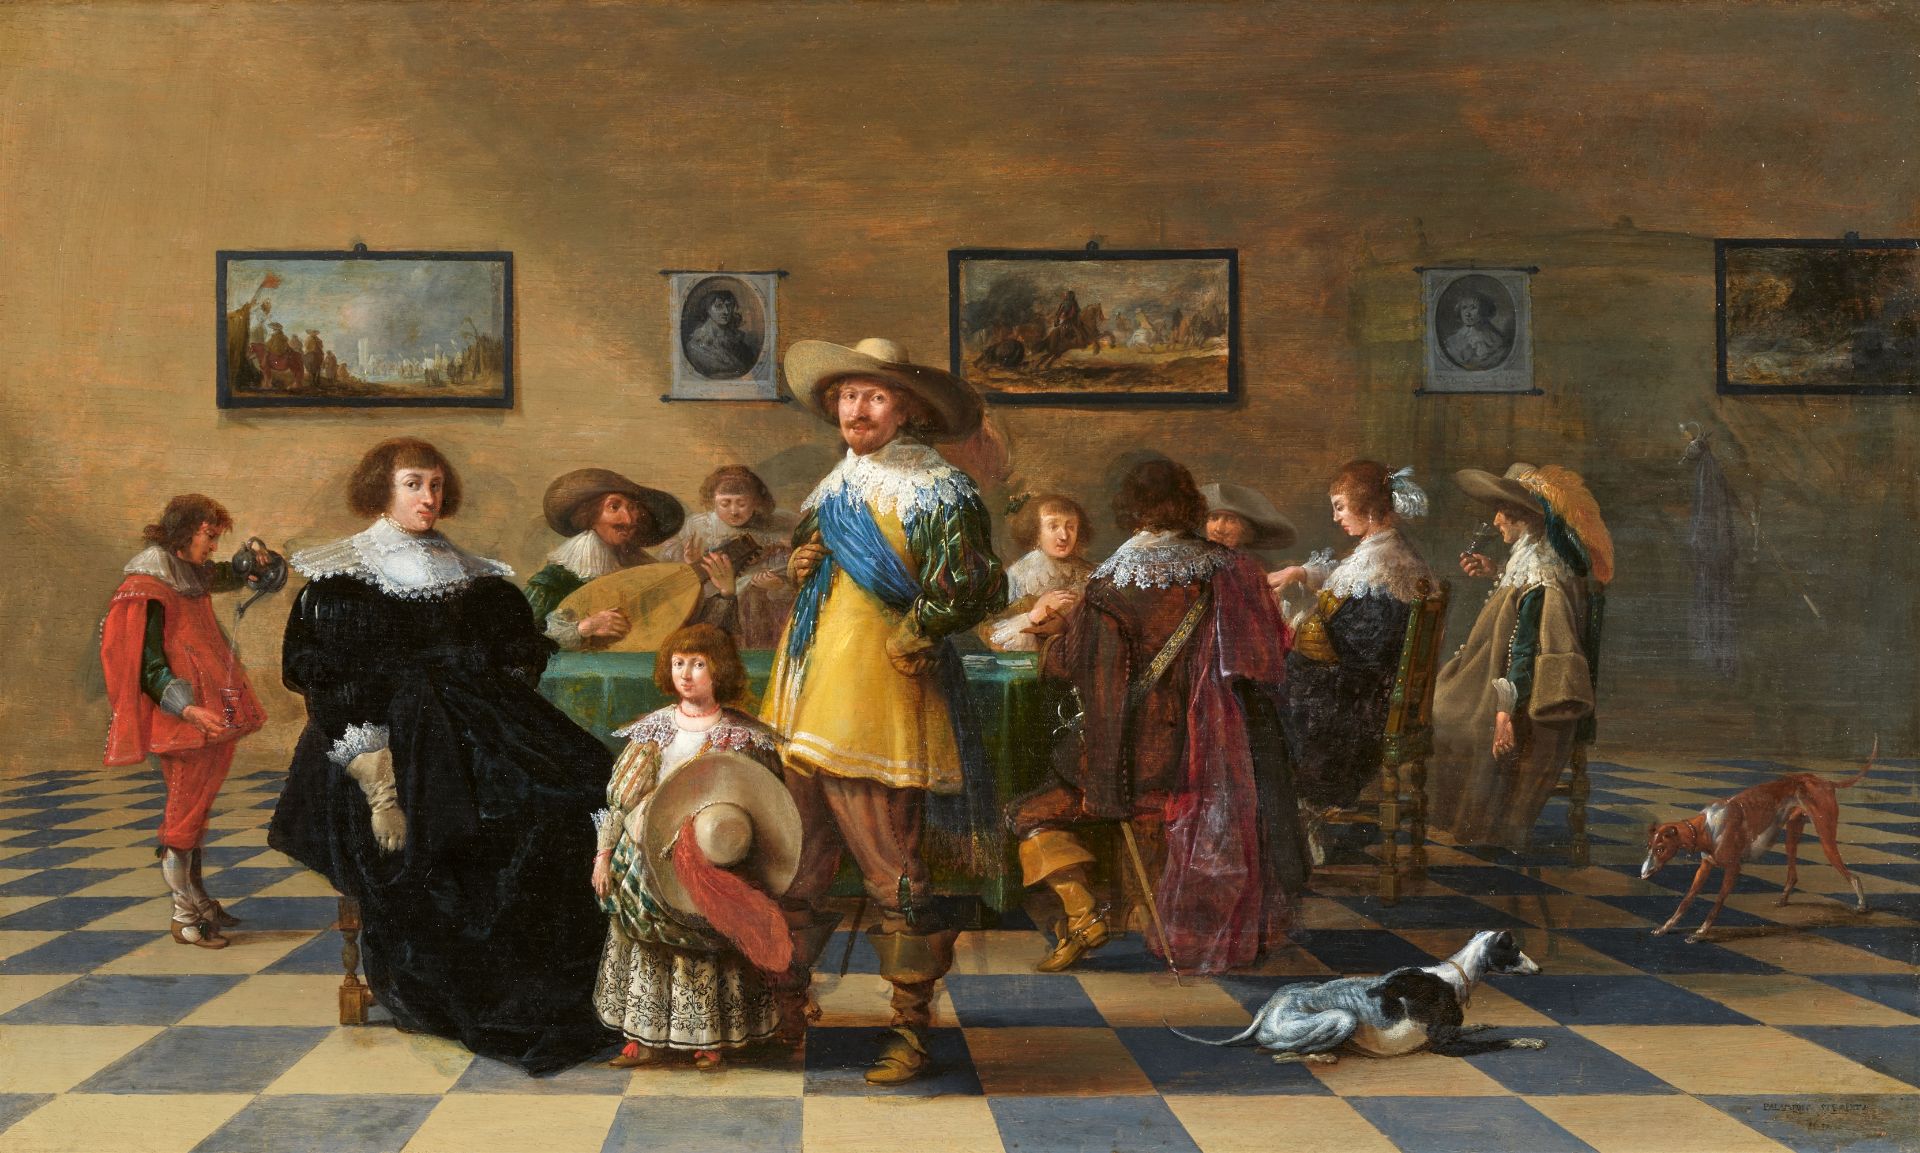 Palamedes Palamedesz., Merry Company in an Interior